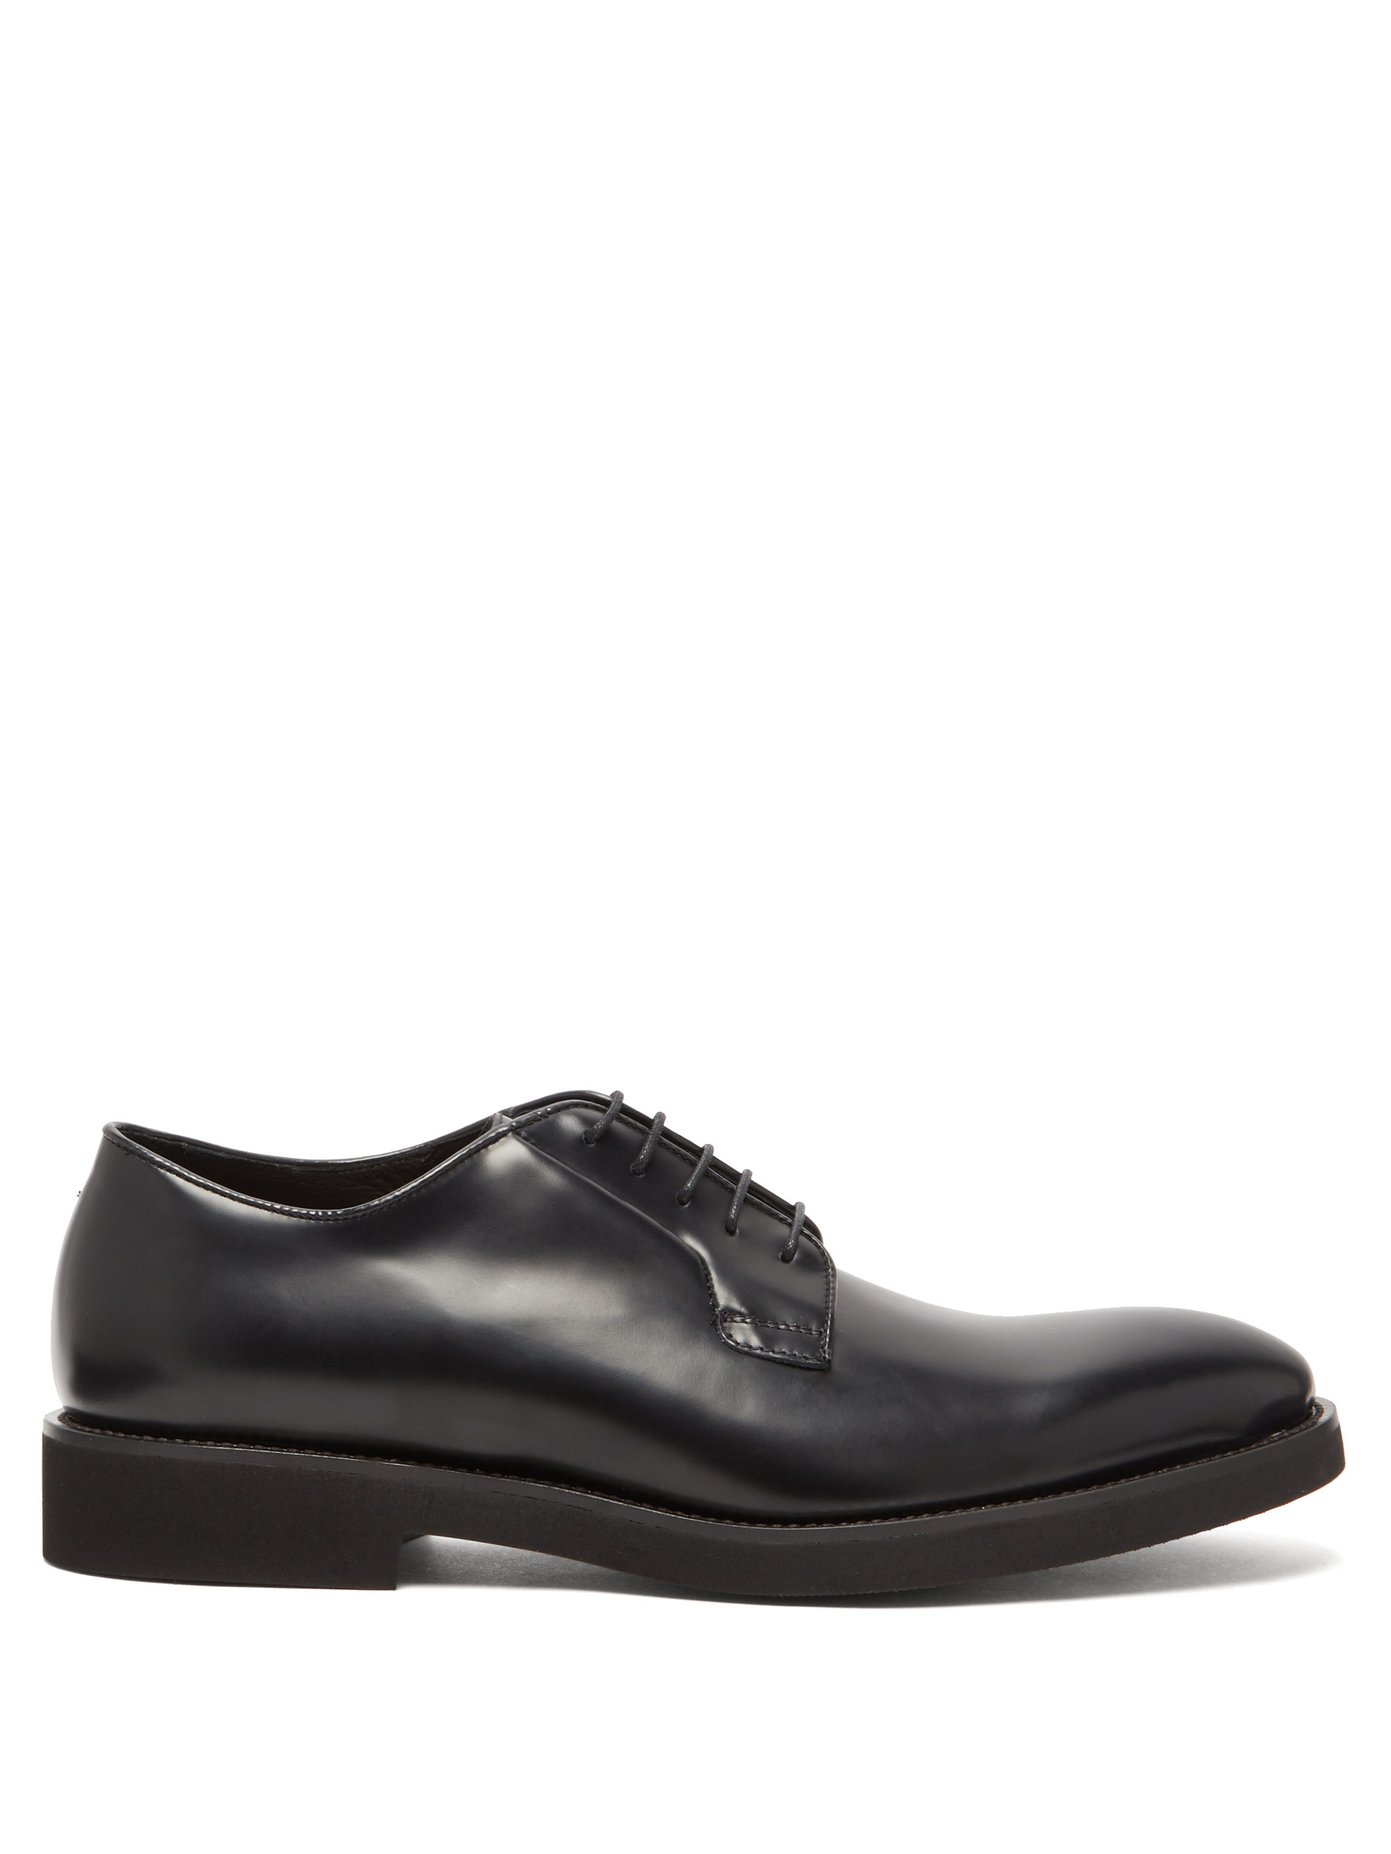 Ludlow leather derby shoes | Paul Smith 